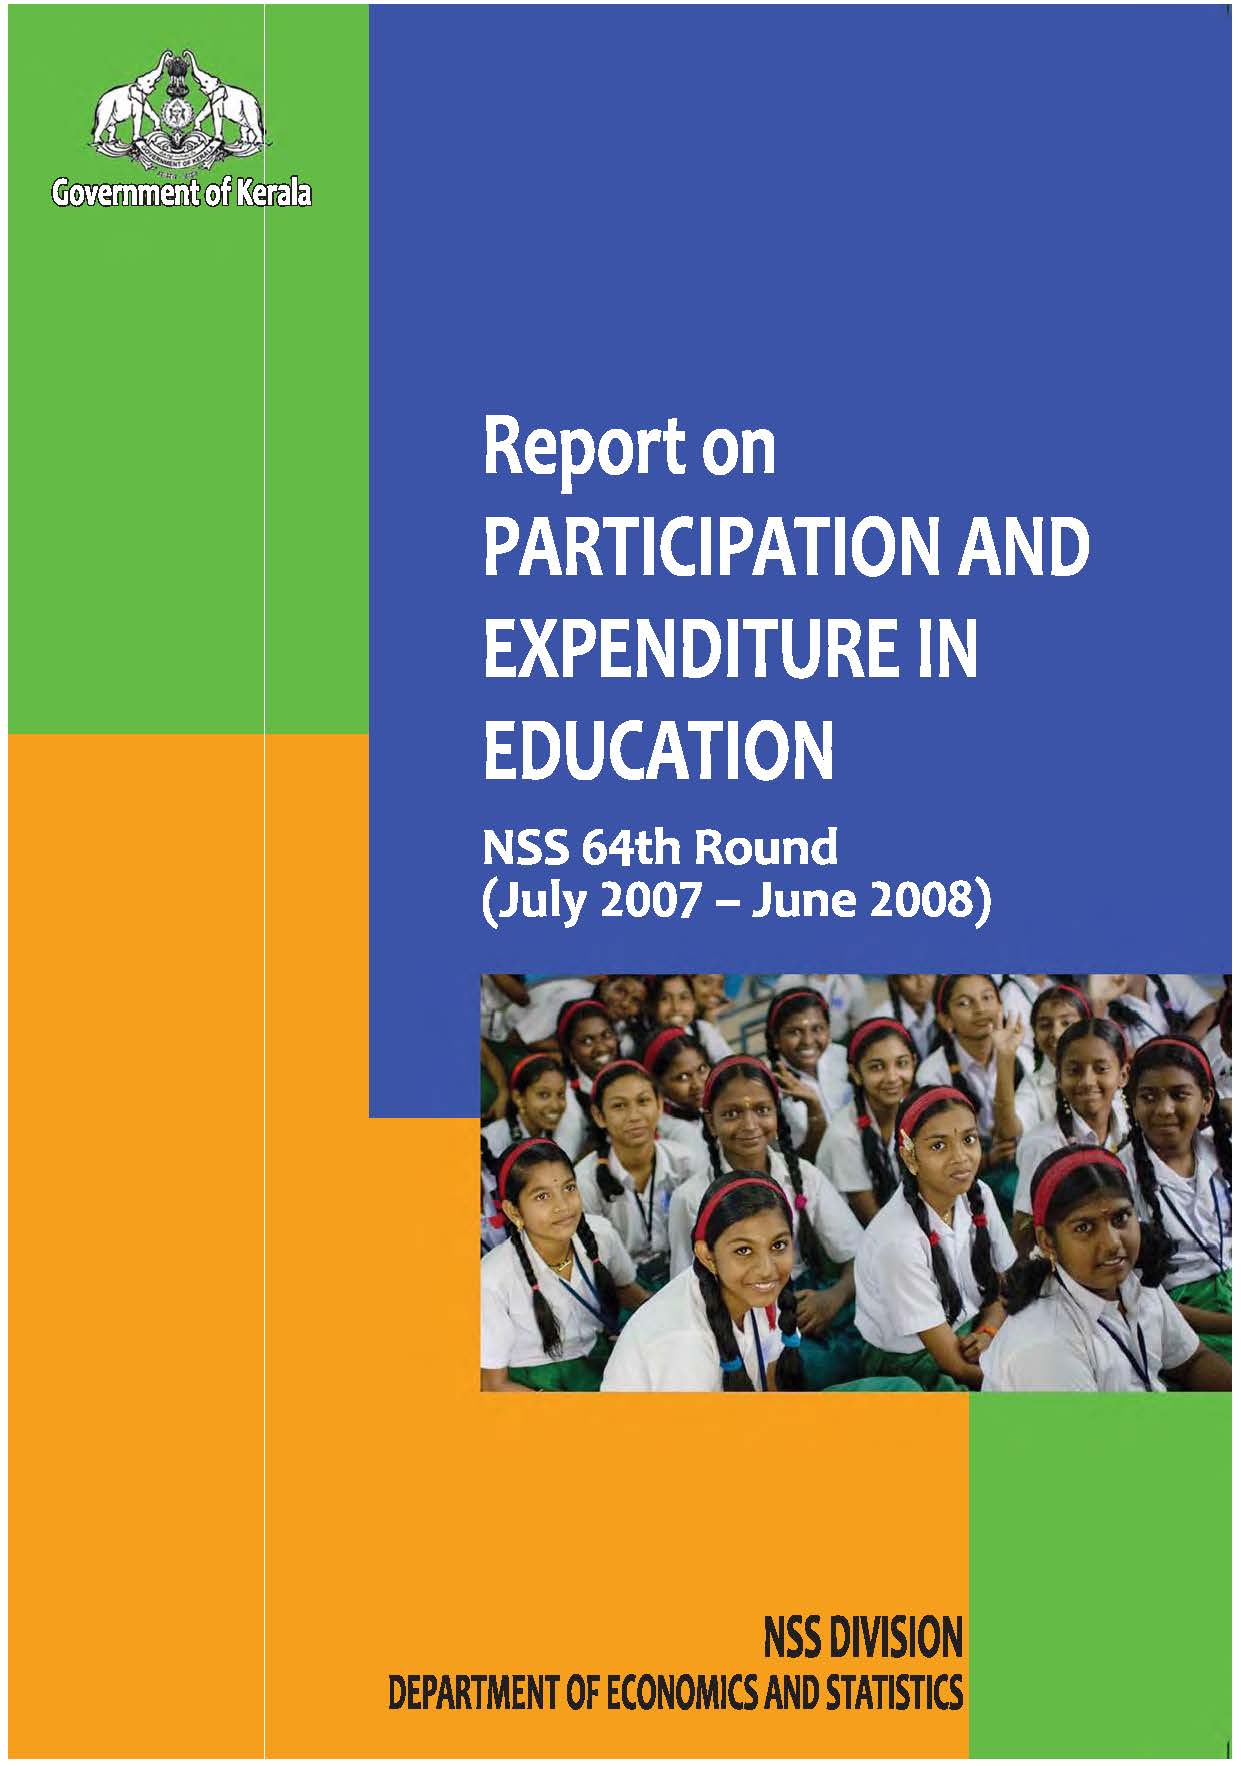 NSS 64th round - Report on Participation and Expenditure in Education